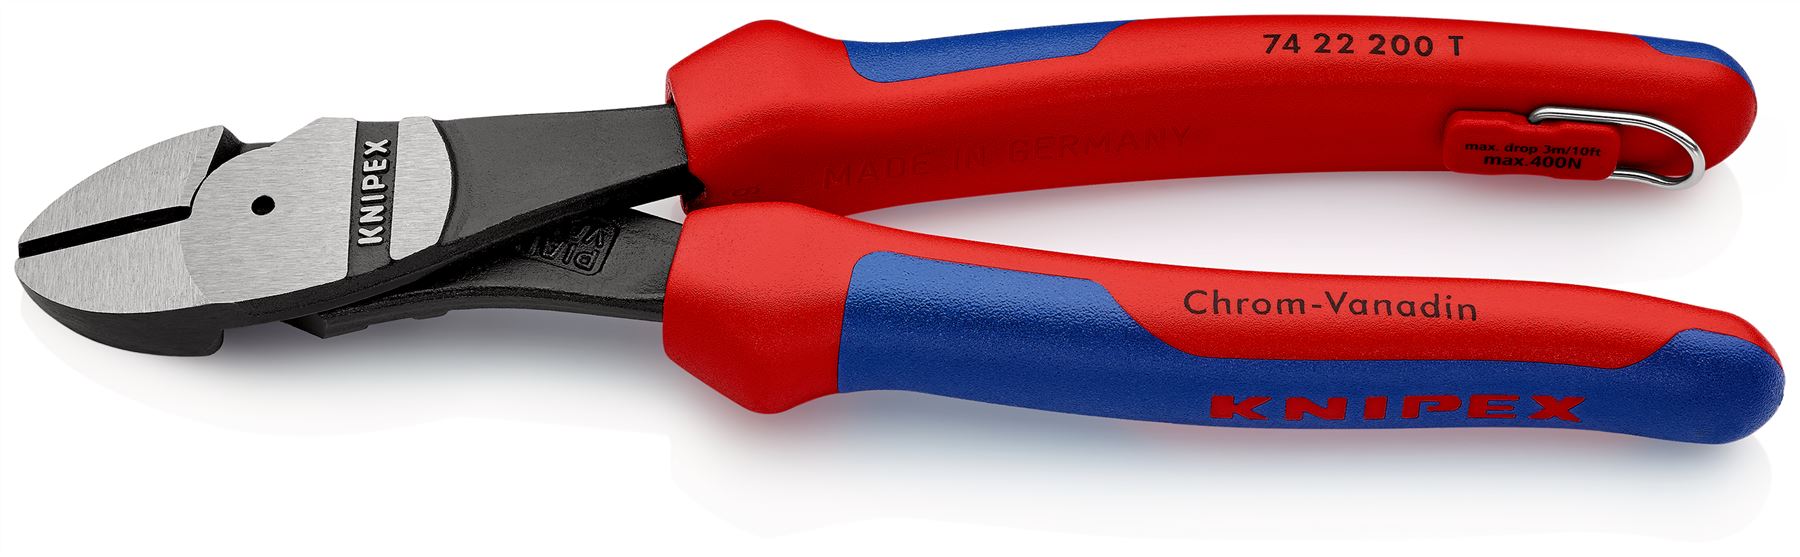 Knipex High Leverage Diagonal Cutter 12° Angled Head 200mm Multi Component Grips Tether Point 74 22 200 T